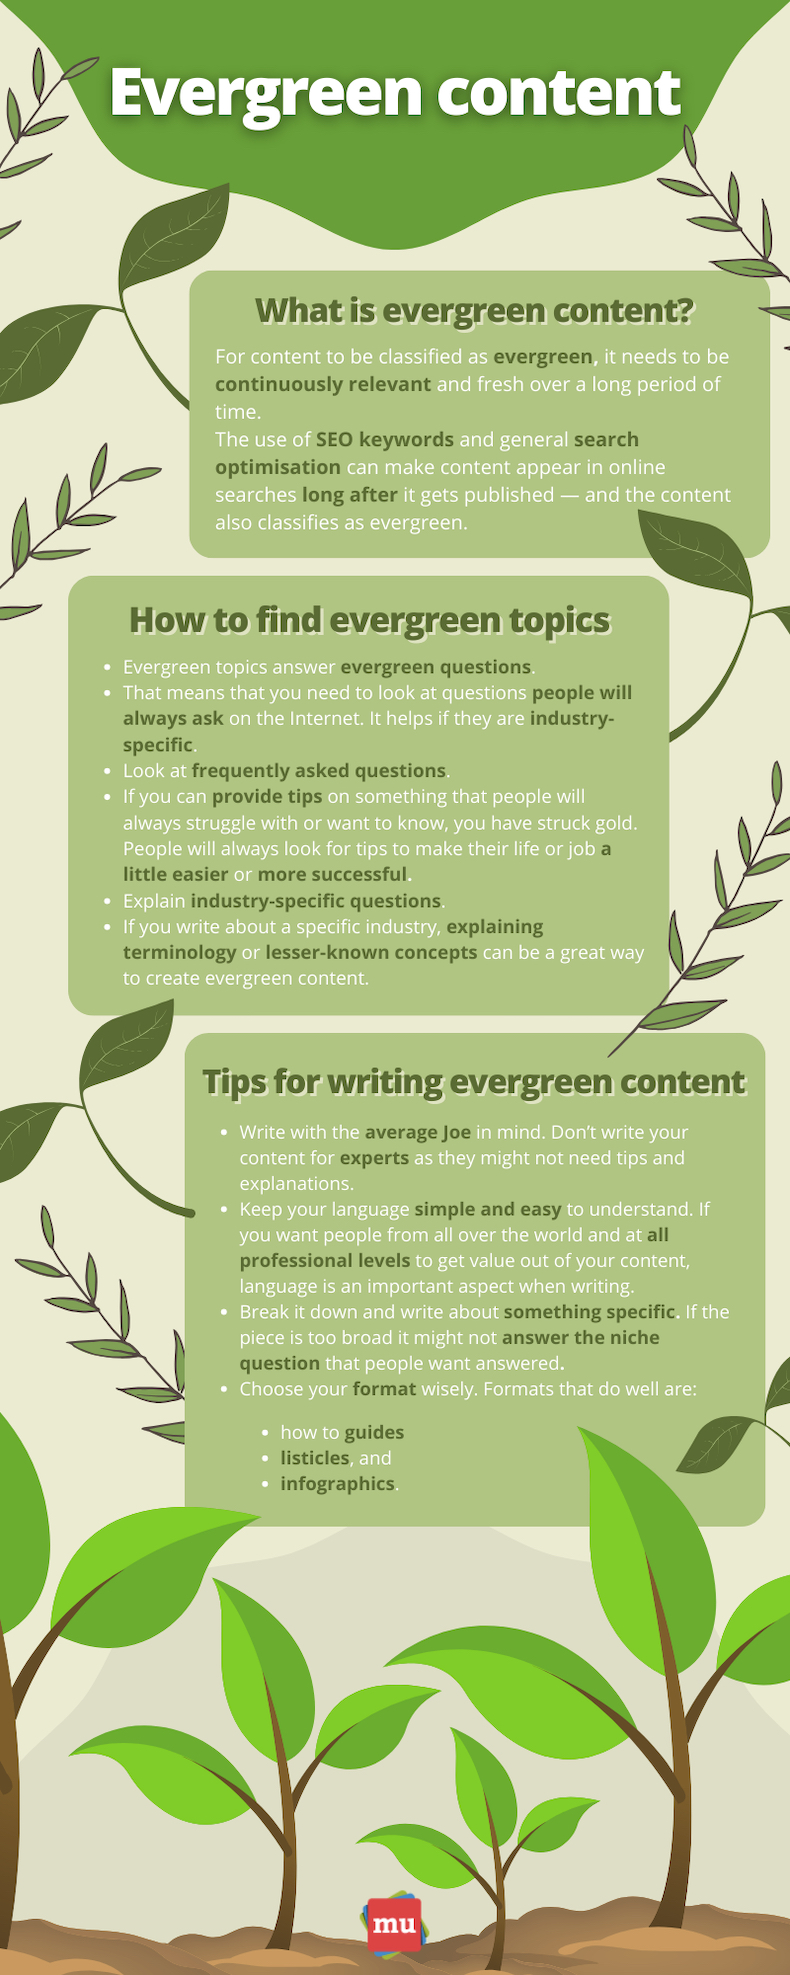 infographic about what marketers need to know about evergreen content